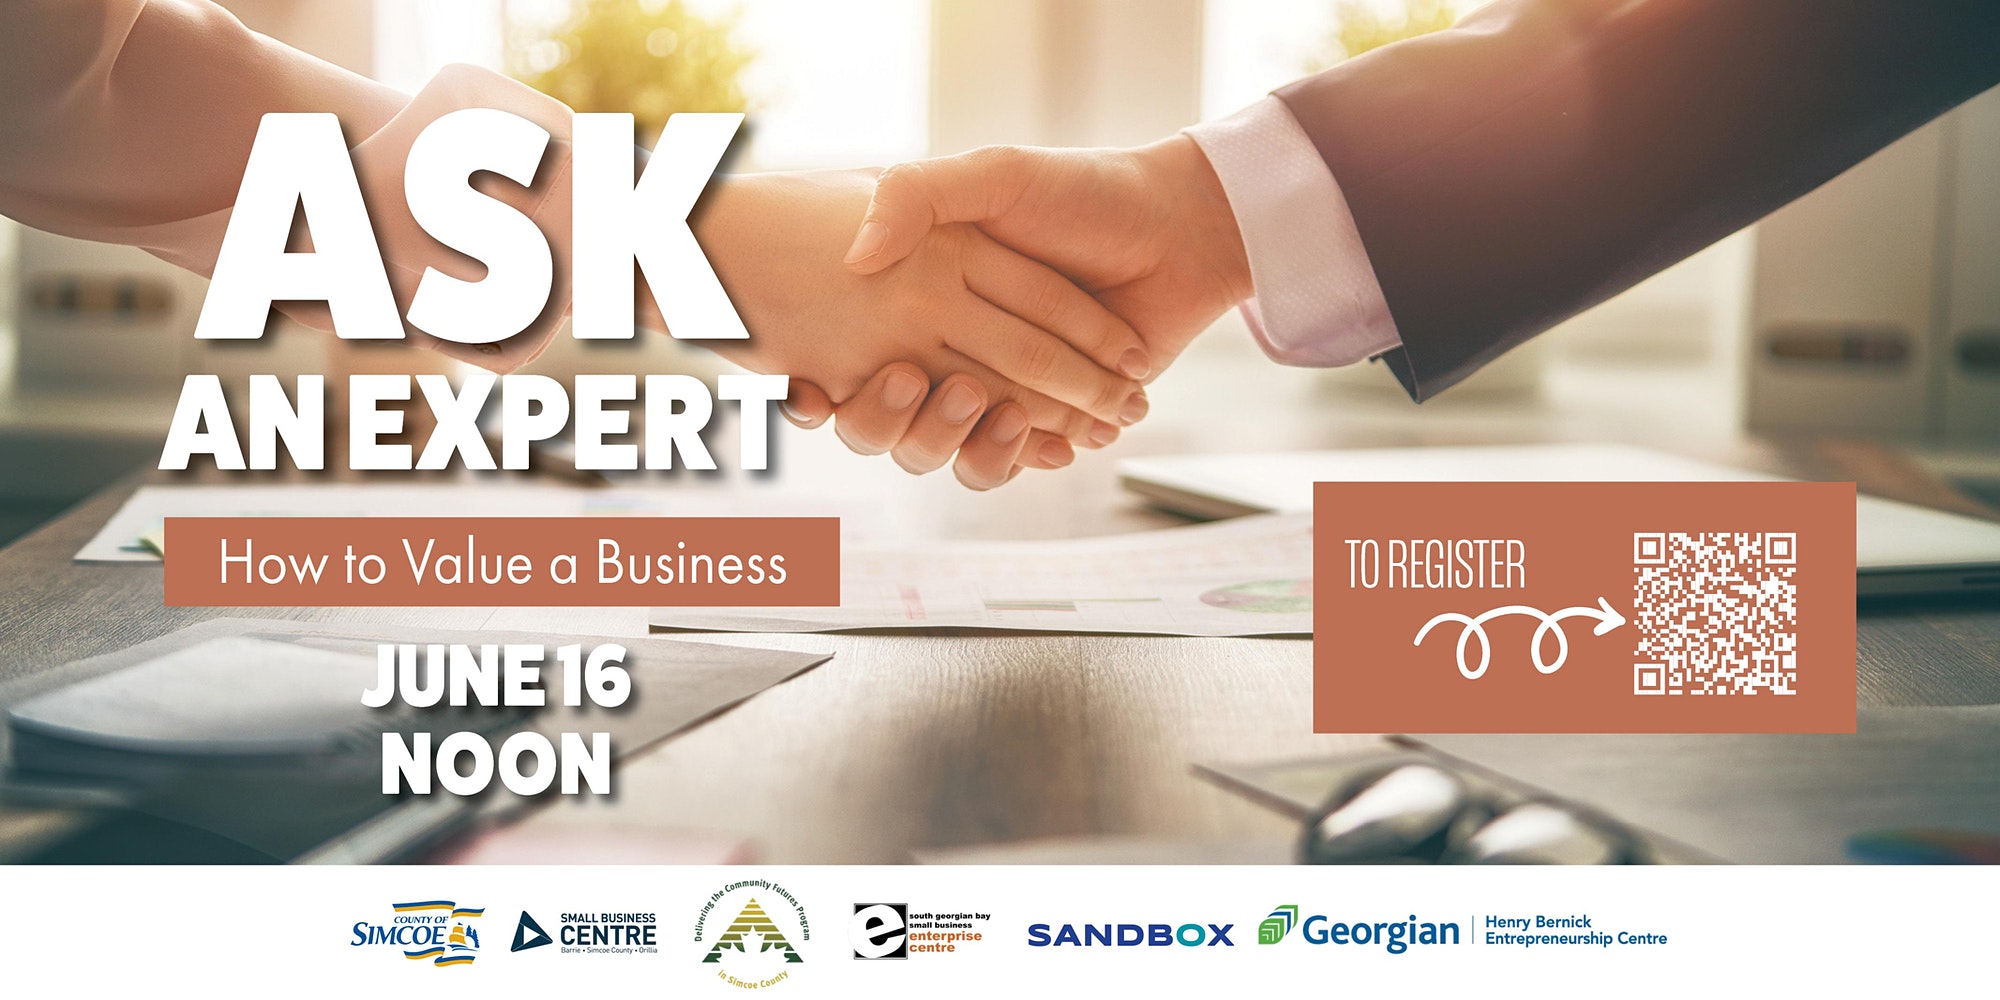 Ask an expert: How to value a business @ 12pm June 16th. Scan to register.